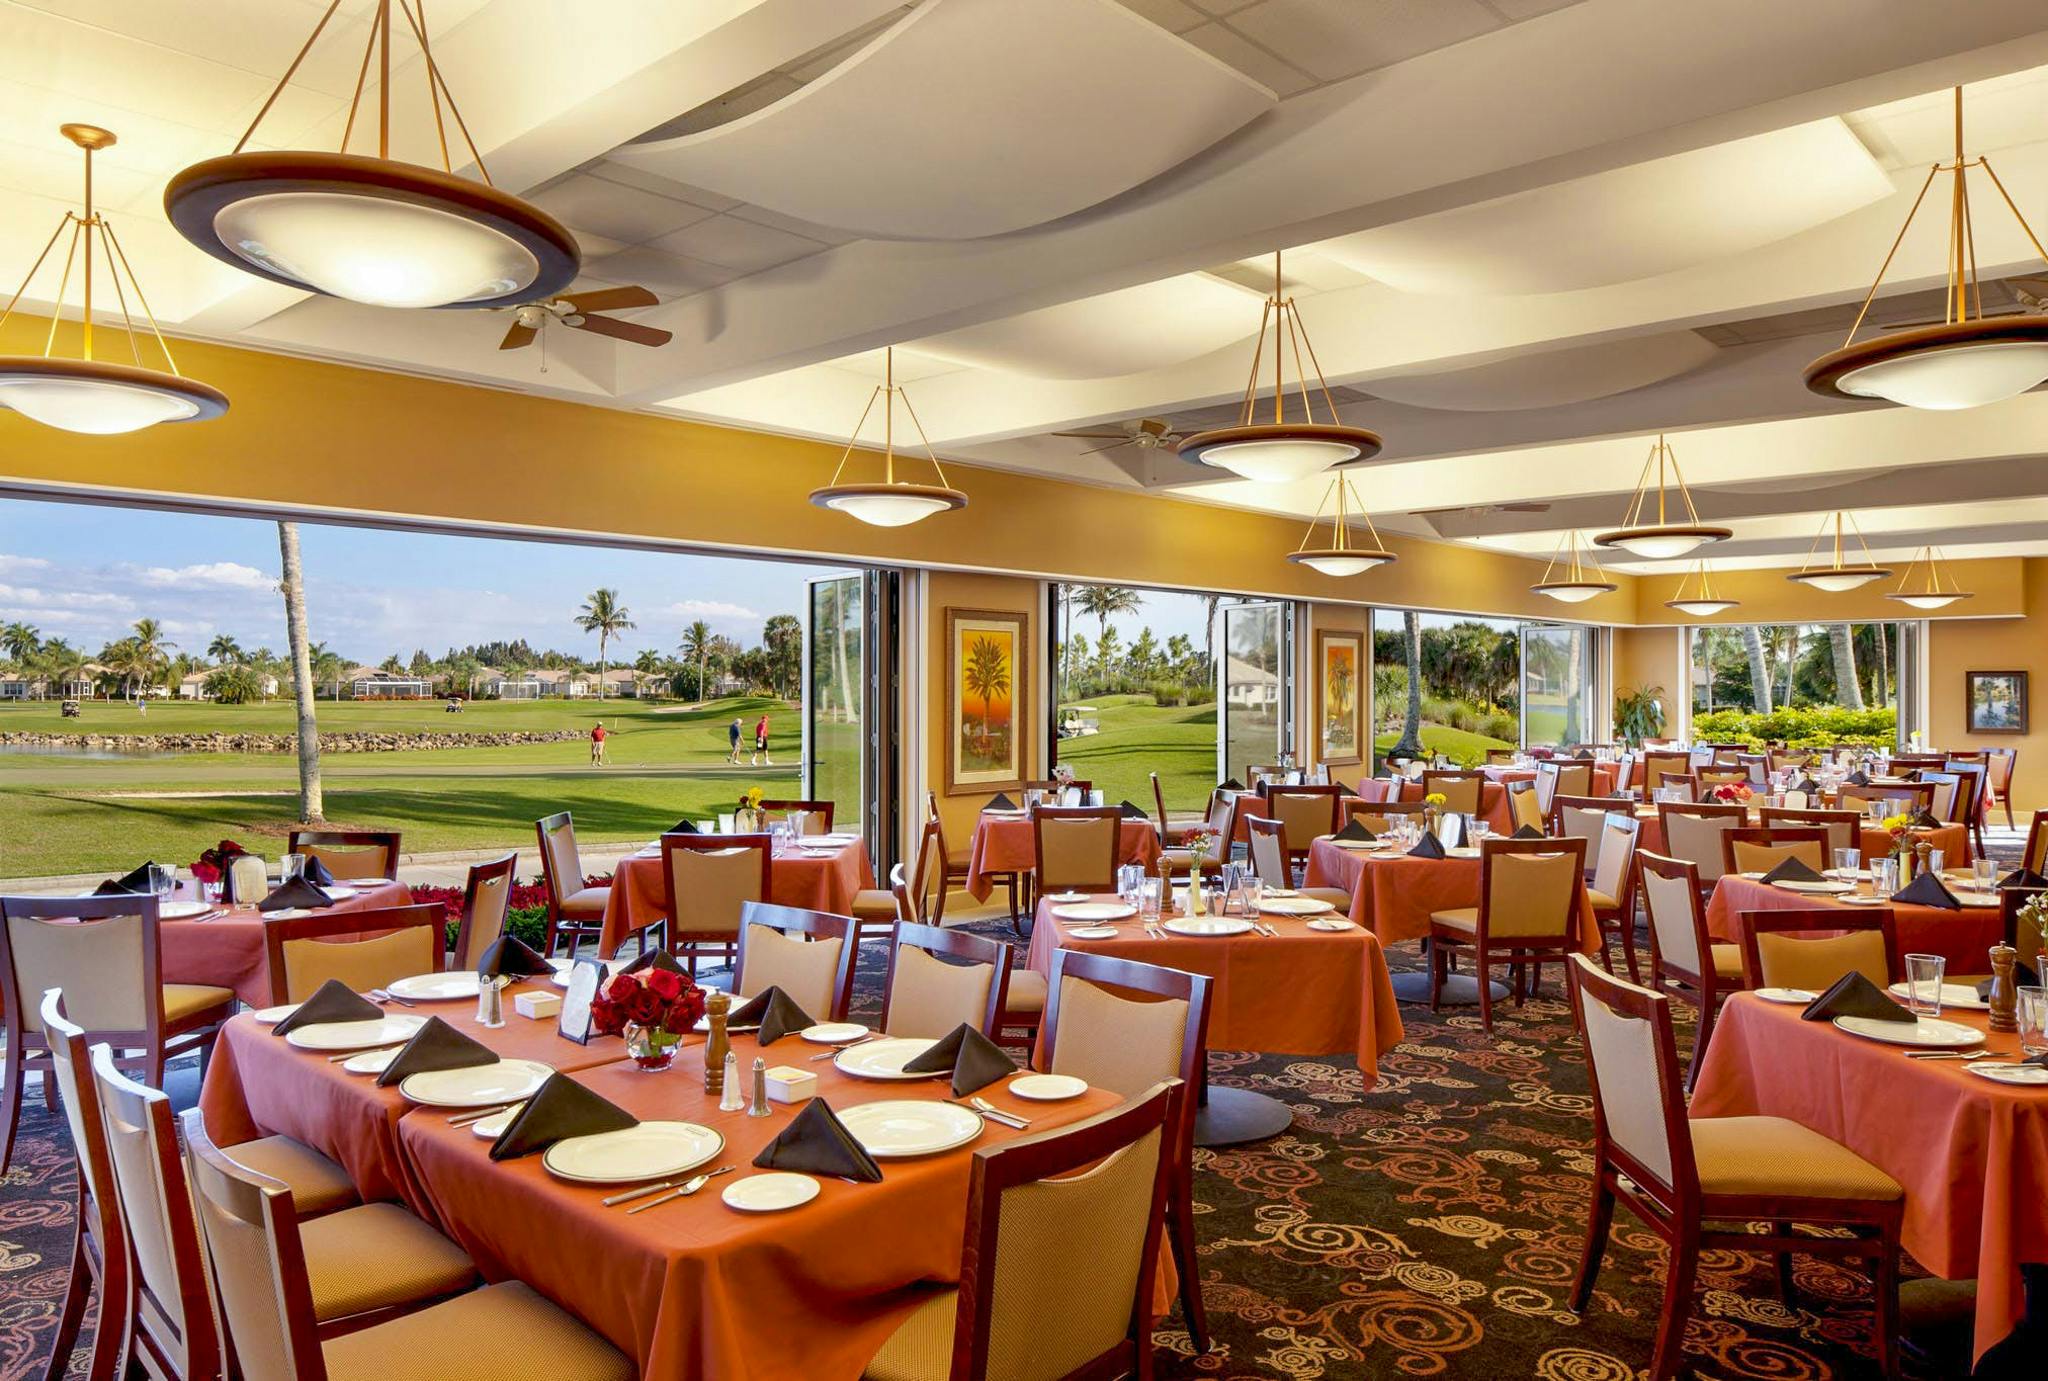 revitalizing country clubs with opening glass walls